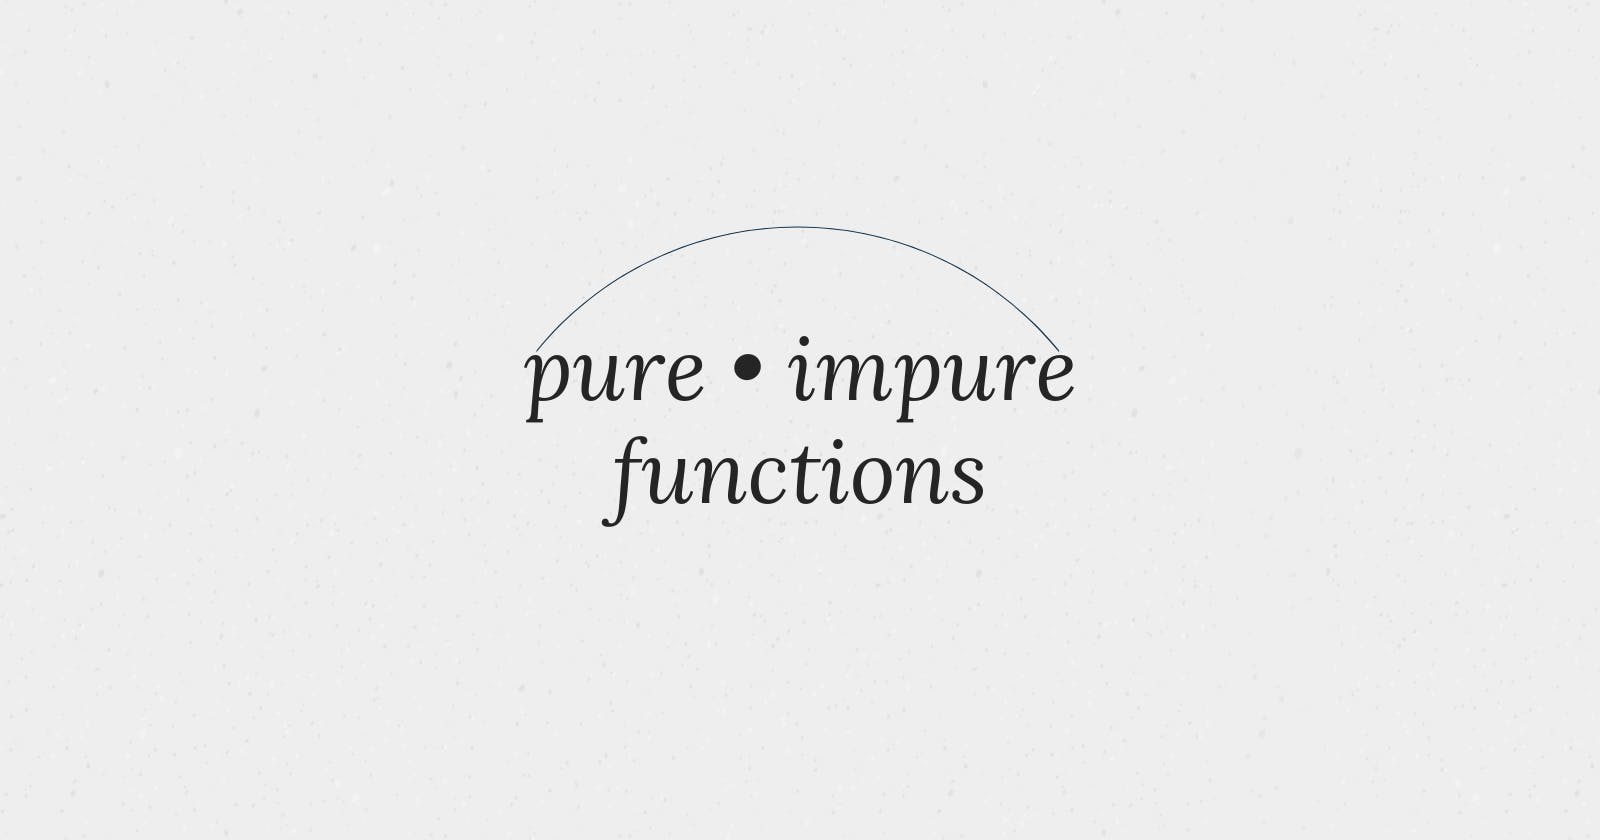 Pure and Impure Functions in JavaScript